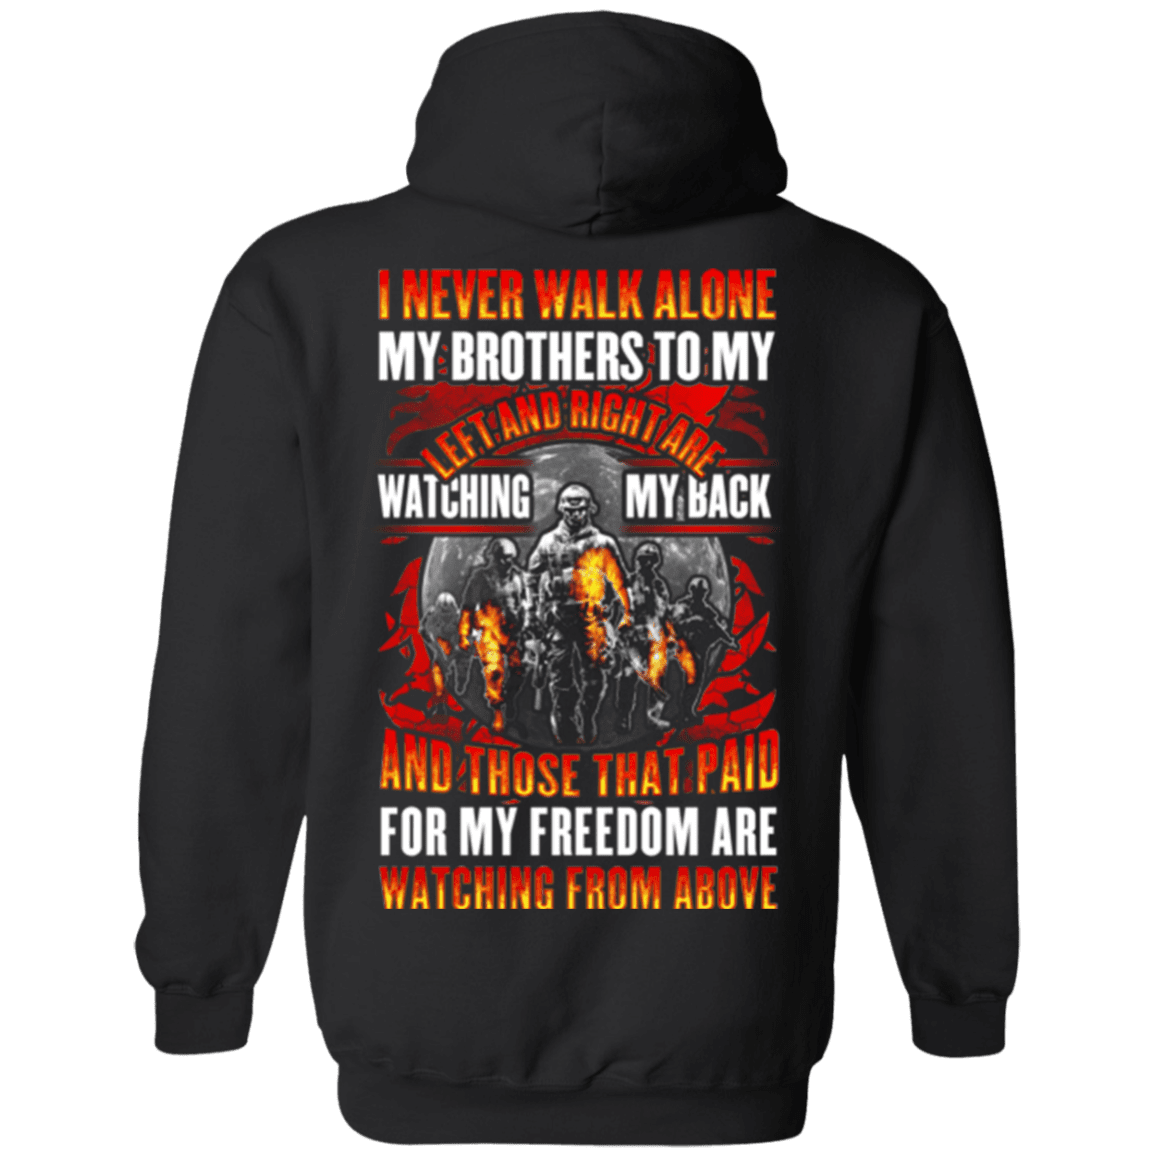 Military T-Shirt "Veteran - My Brothers Watching My Back, My Freedom Watching From Above"-TShirt-General-Veterans Nation